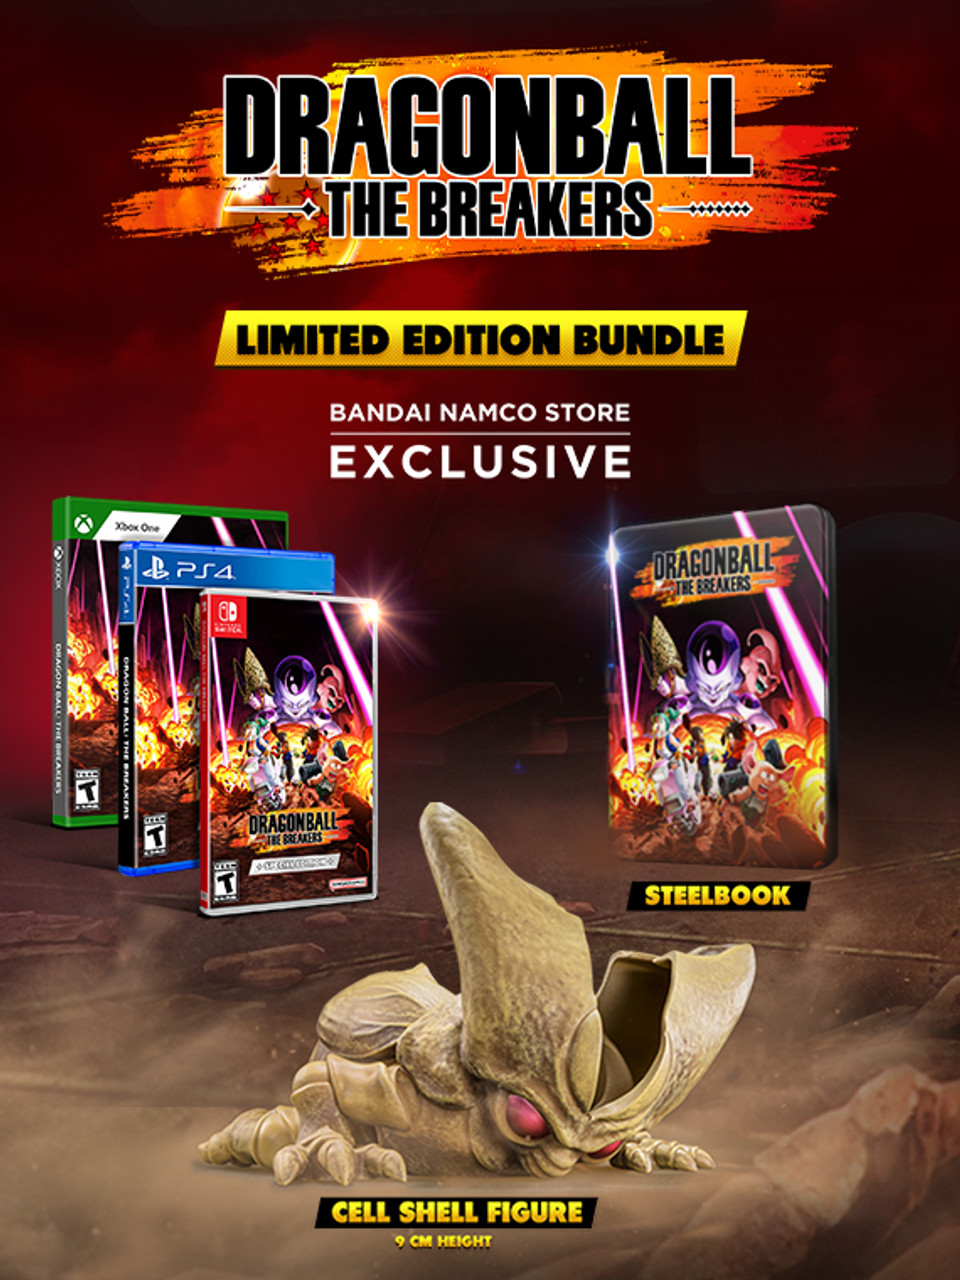 Dragon Ball: The Breakers Trophy Guides and PSN Price History